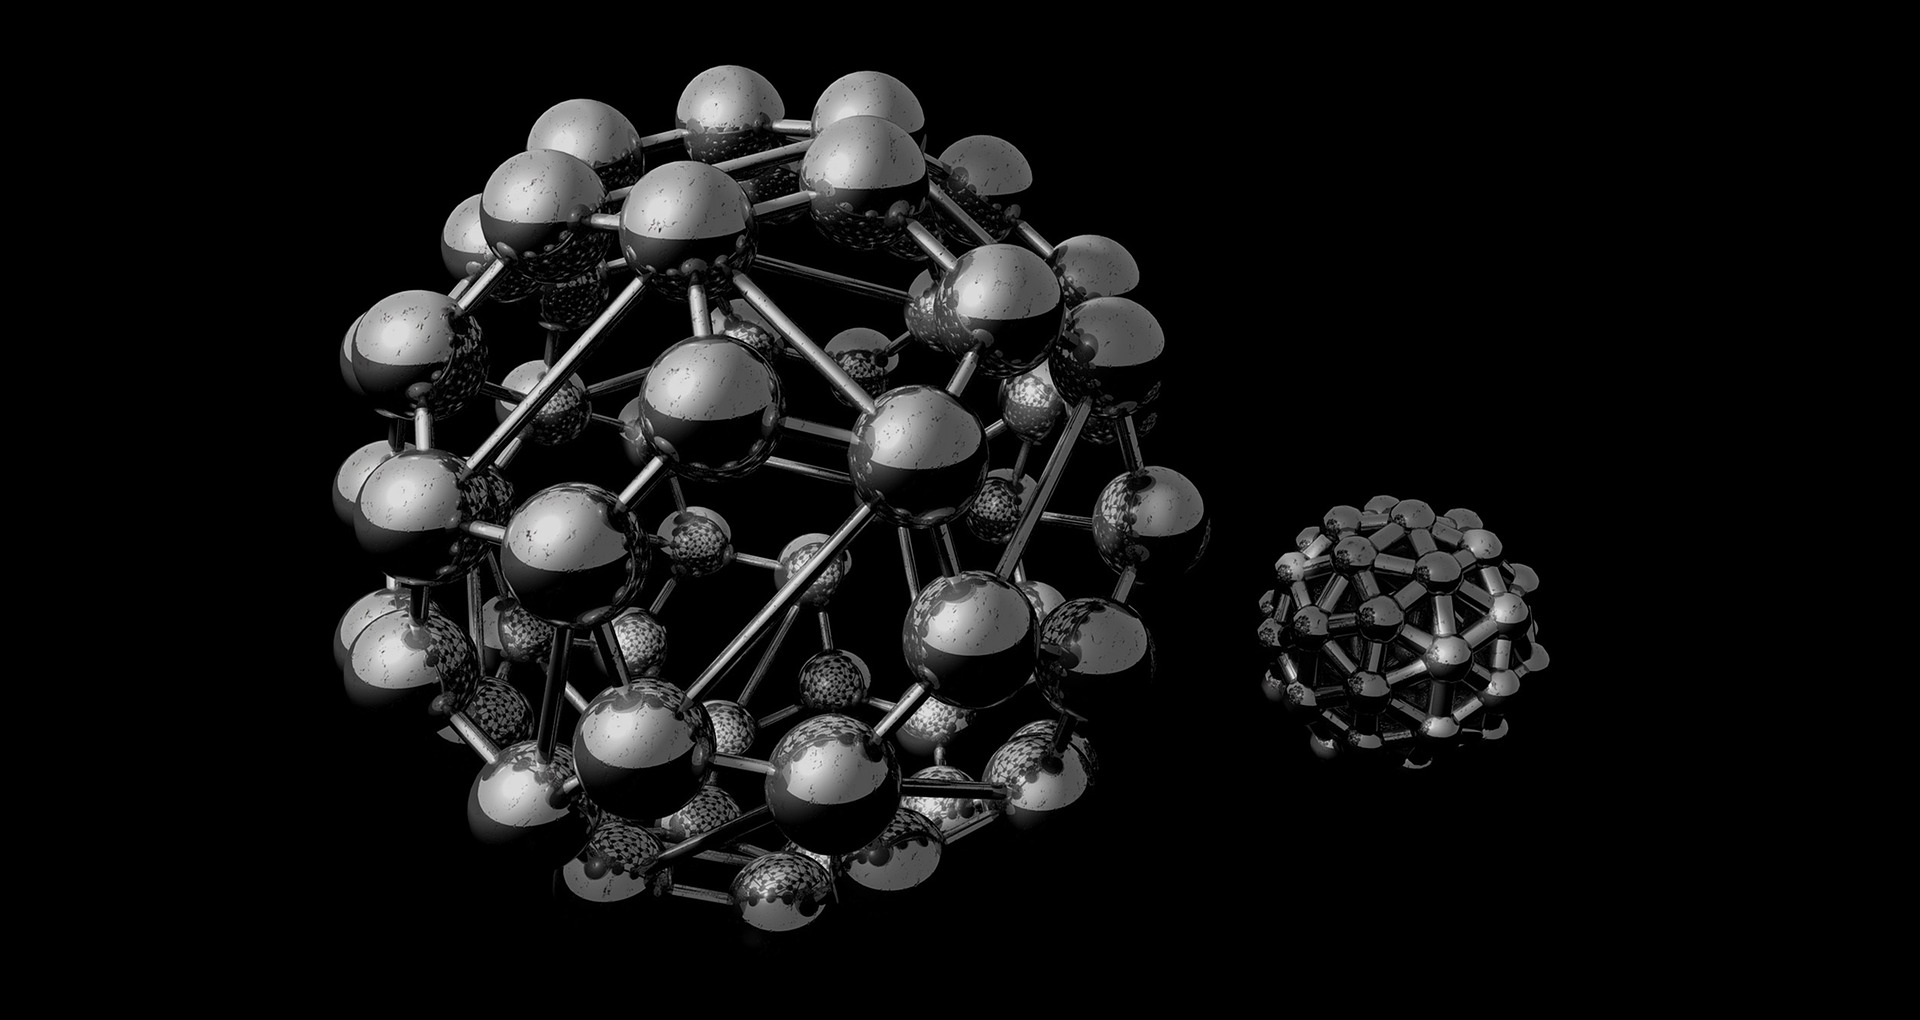 A representation of a "bucky ball" or fullerene molecule, commonly used as charge acceptors in solar panels.